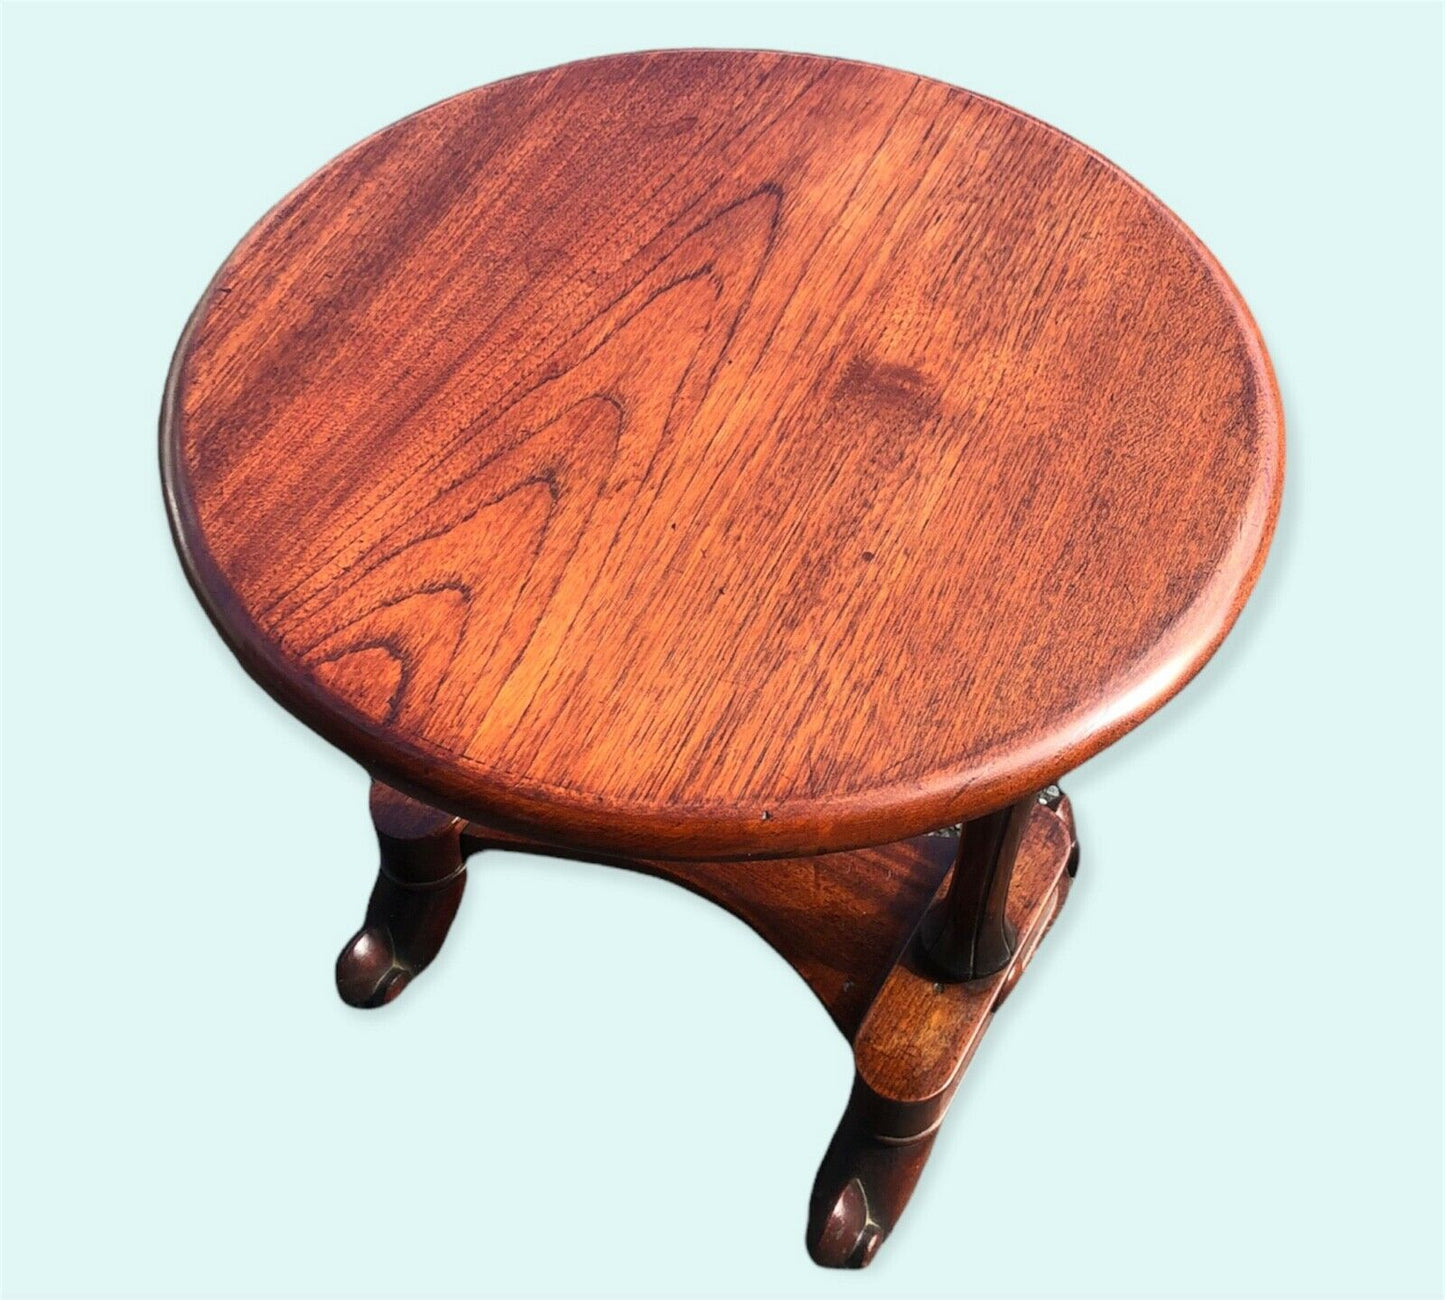 000979.....Antique Mahogany Coffee / Occasional Table